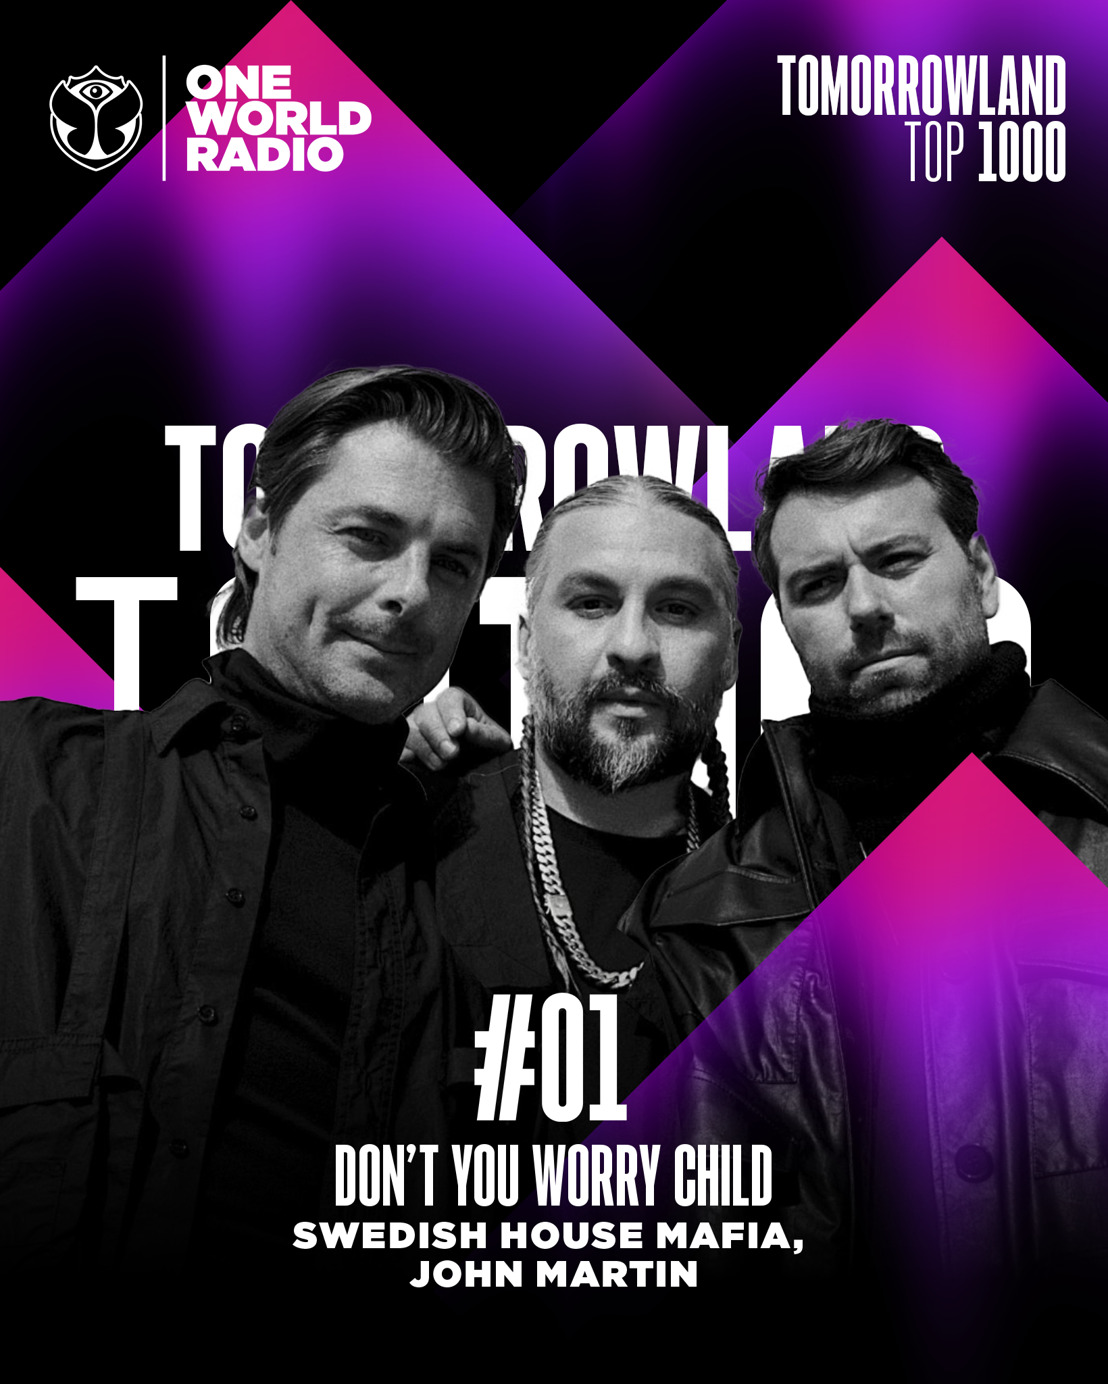 Swedish House Mafia’s ‘Don’t You Worry Child’ is your ultimate number 1 in the Tomorrowland Top 1000